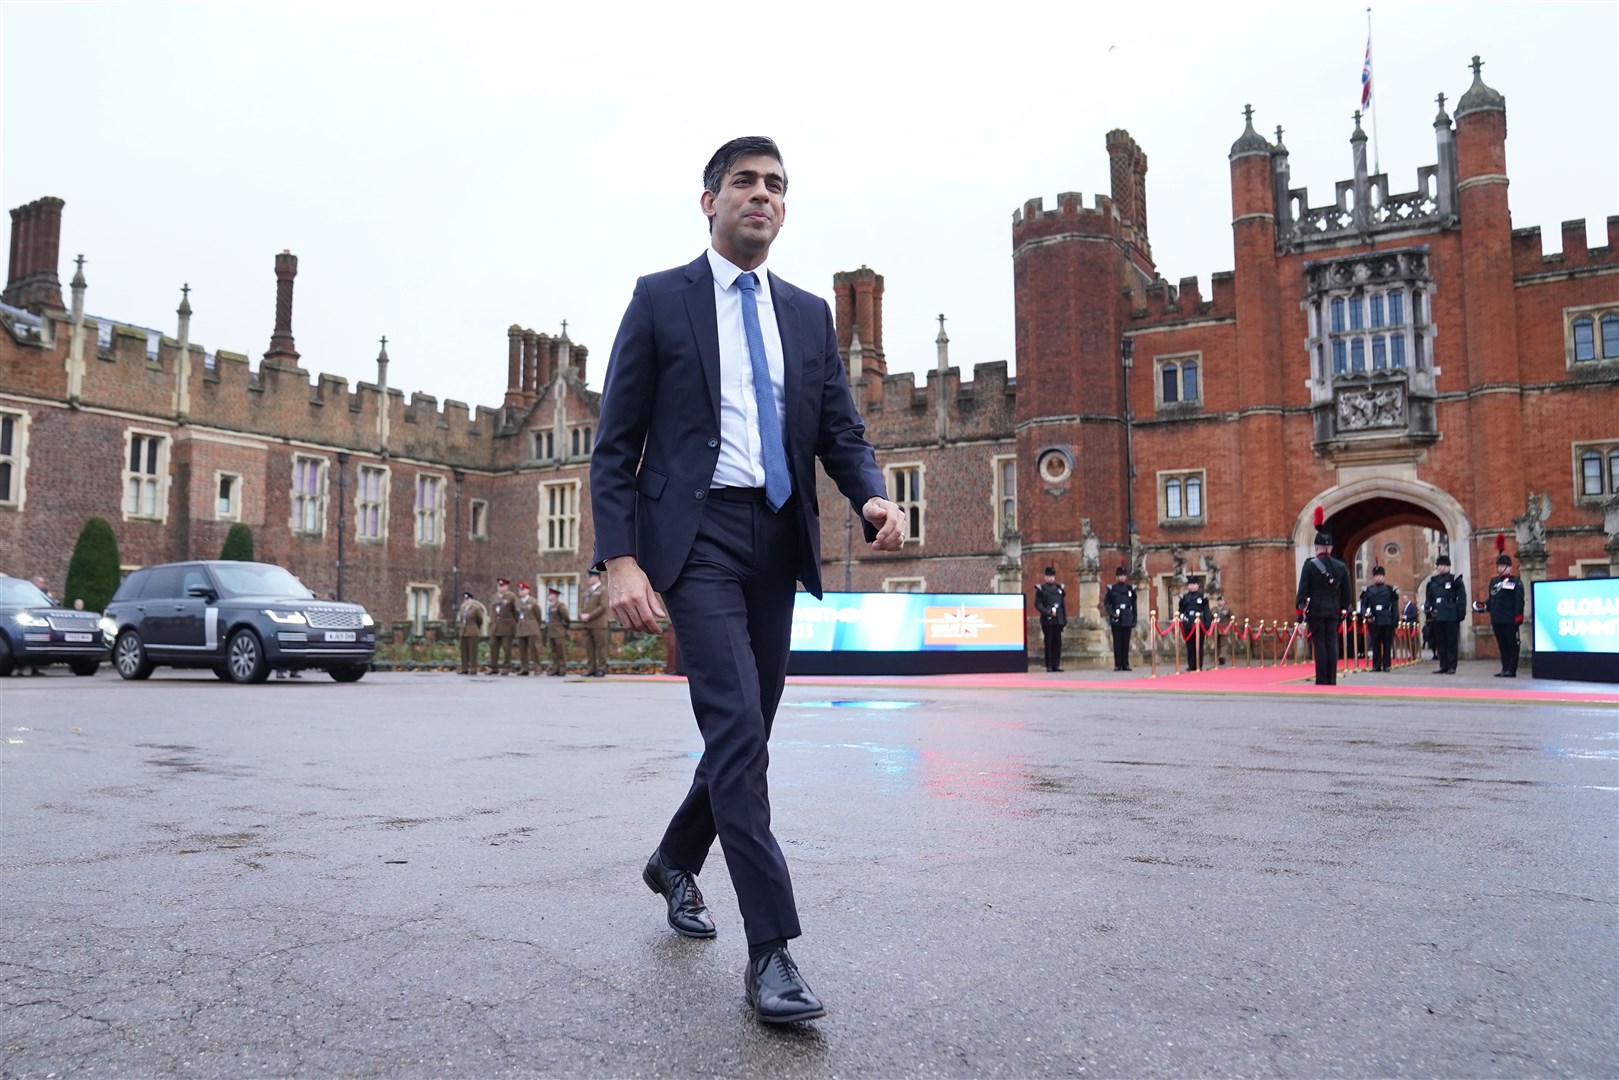 Prime Minister Rishi Sunak arriving at the Global Investment Summit at Hampton Court Palace, in East Molesey, Surrey (Stefan Rousseau/PA)